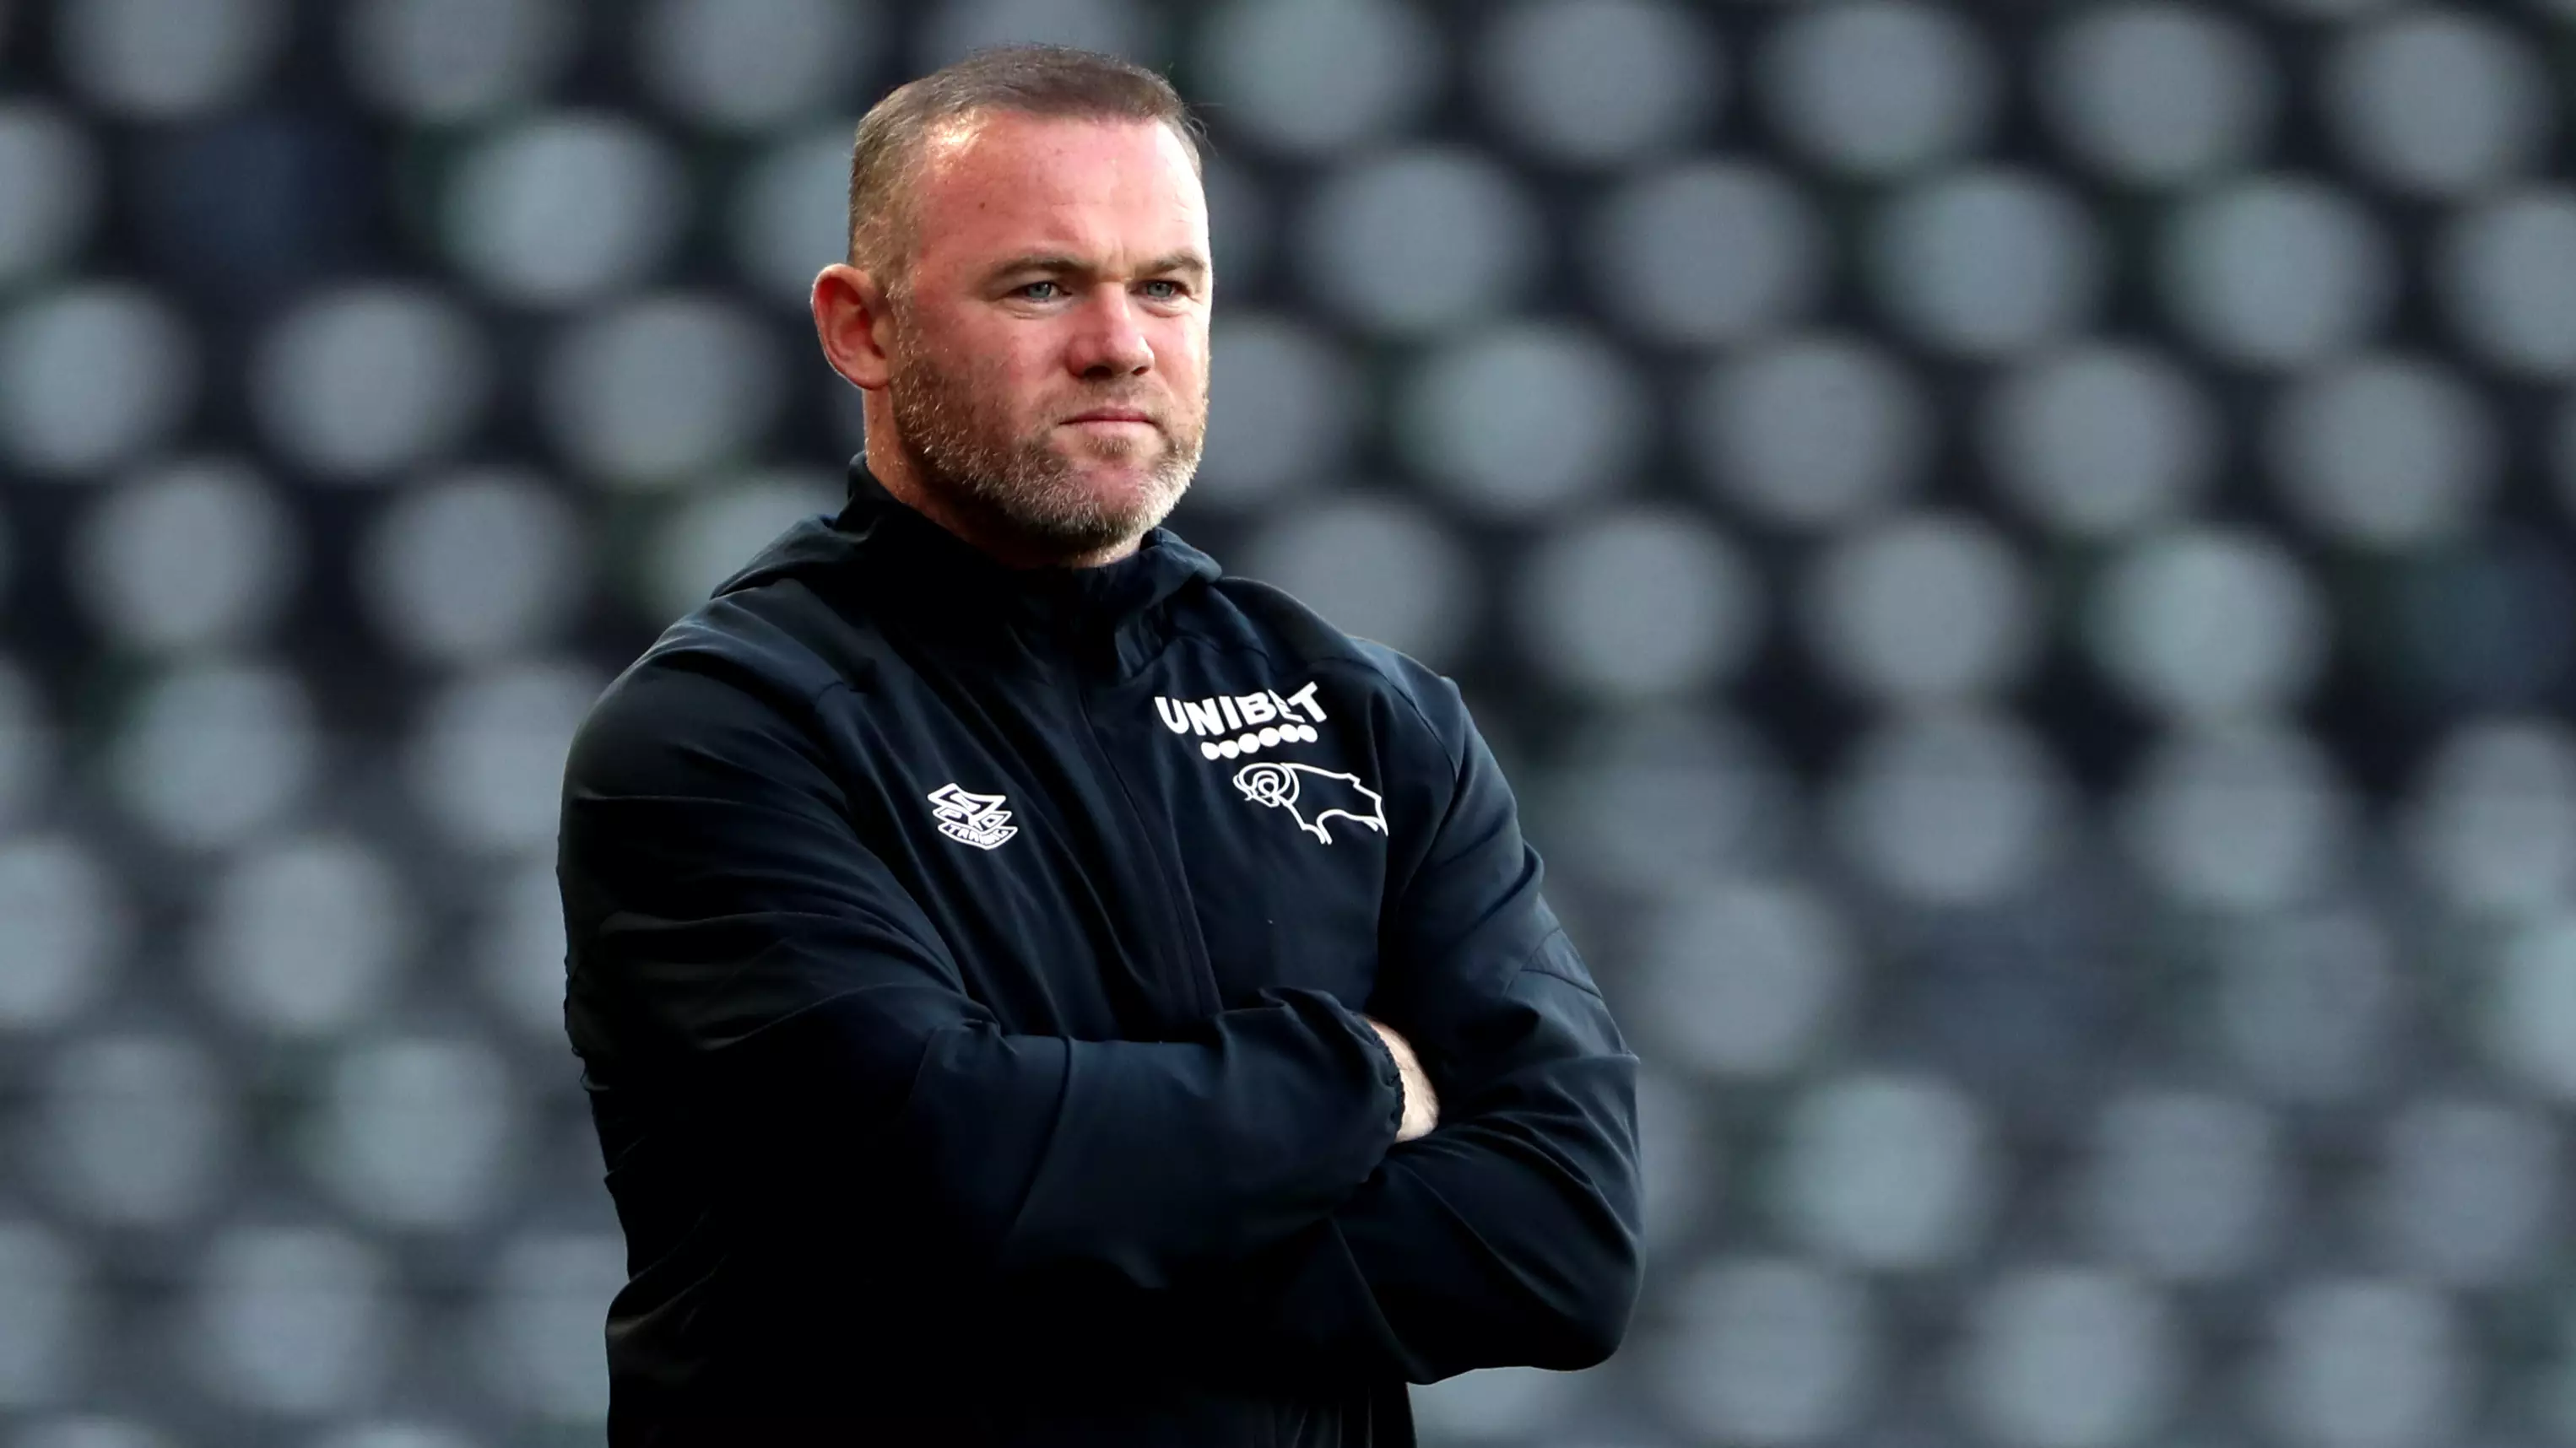 Wayne Rooney Breaks His Silence On Private Party With Three Women